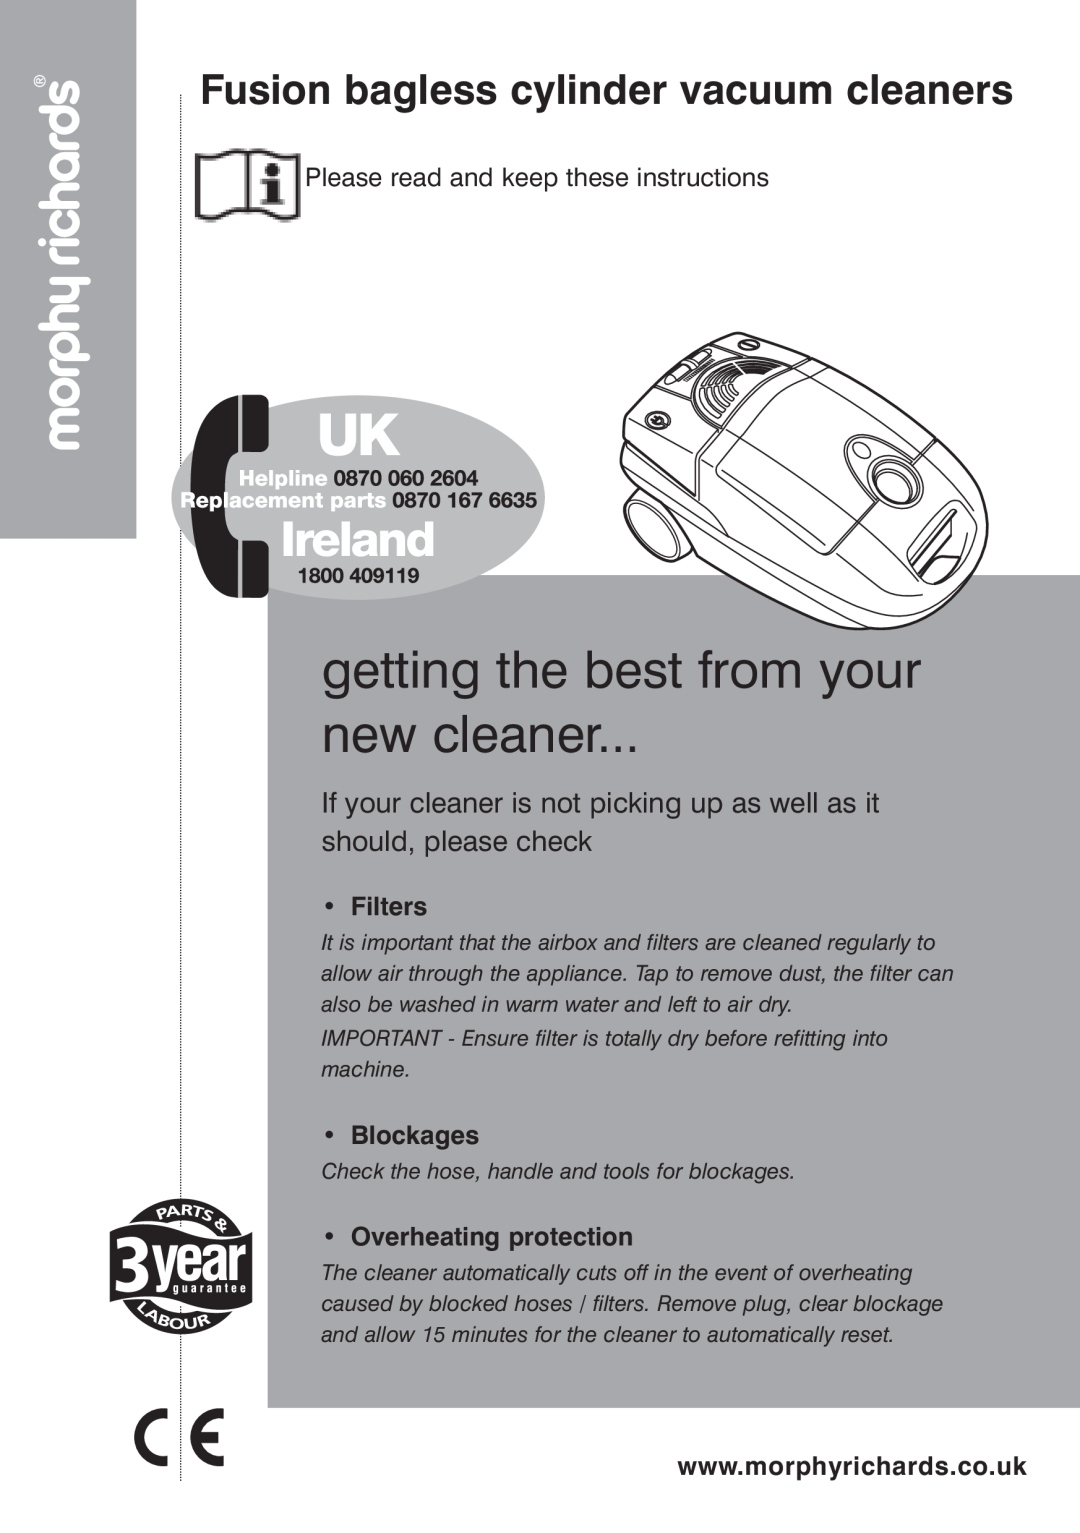 Morphy Richards Vacuum Cleaner manual Filters, Blockages, Overheating protection, getting the best from your new cleaner 